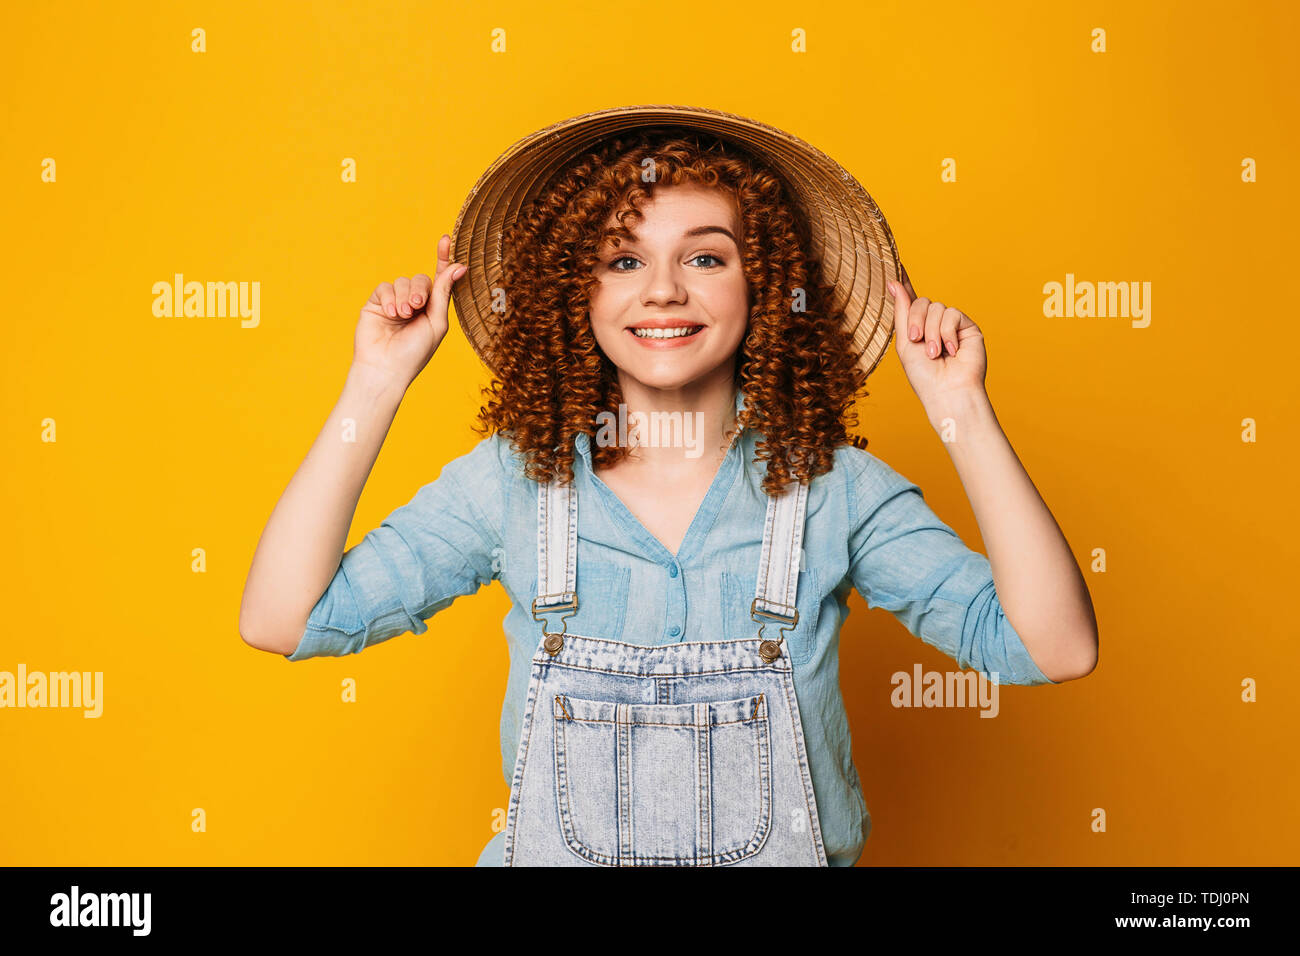 A little girl with curly hair in a straw hat and black overalls